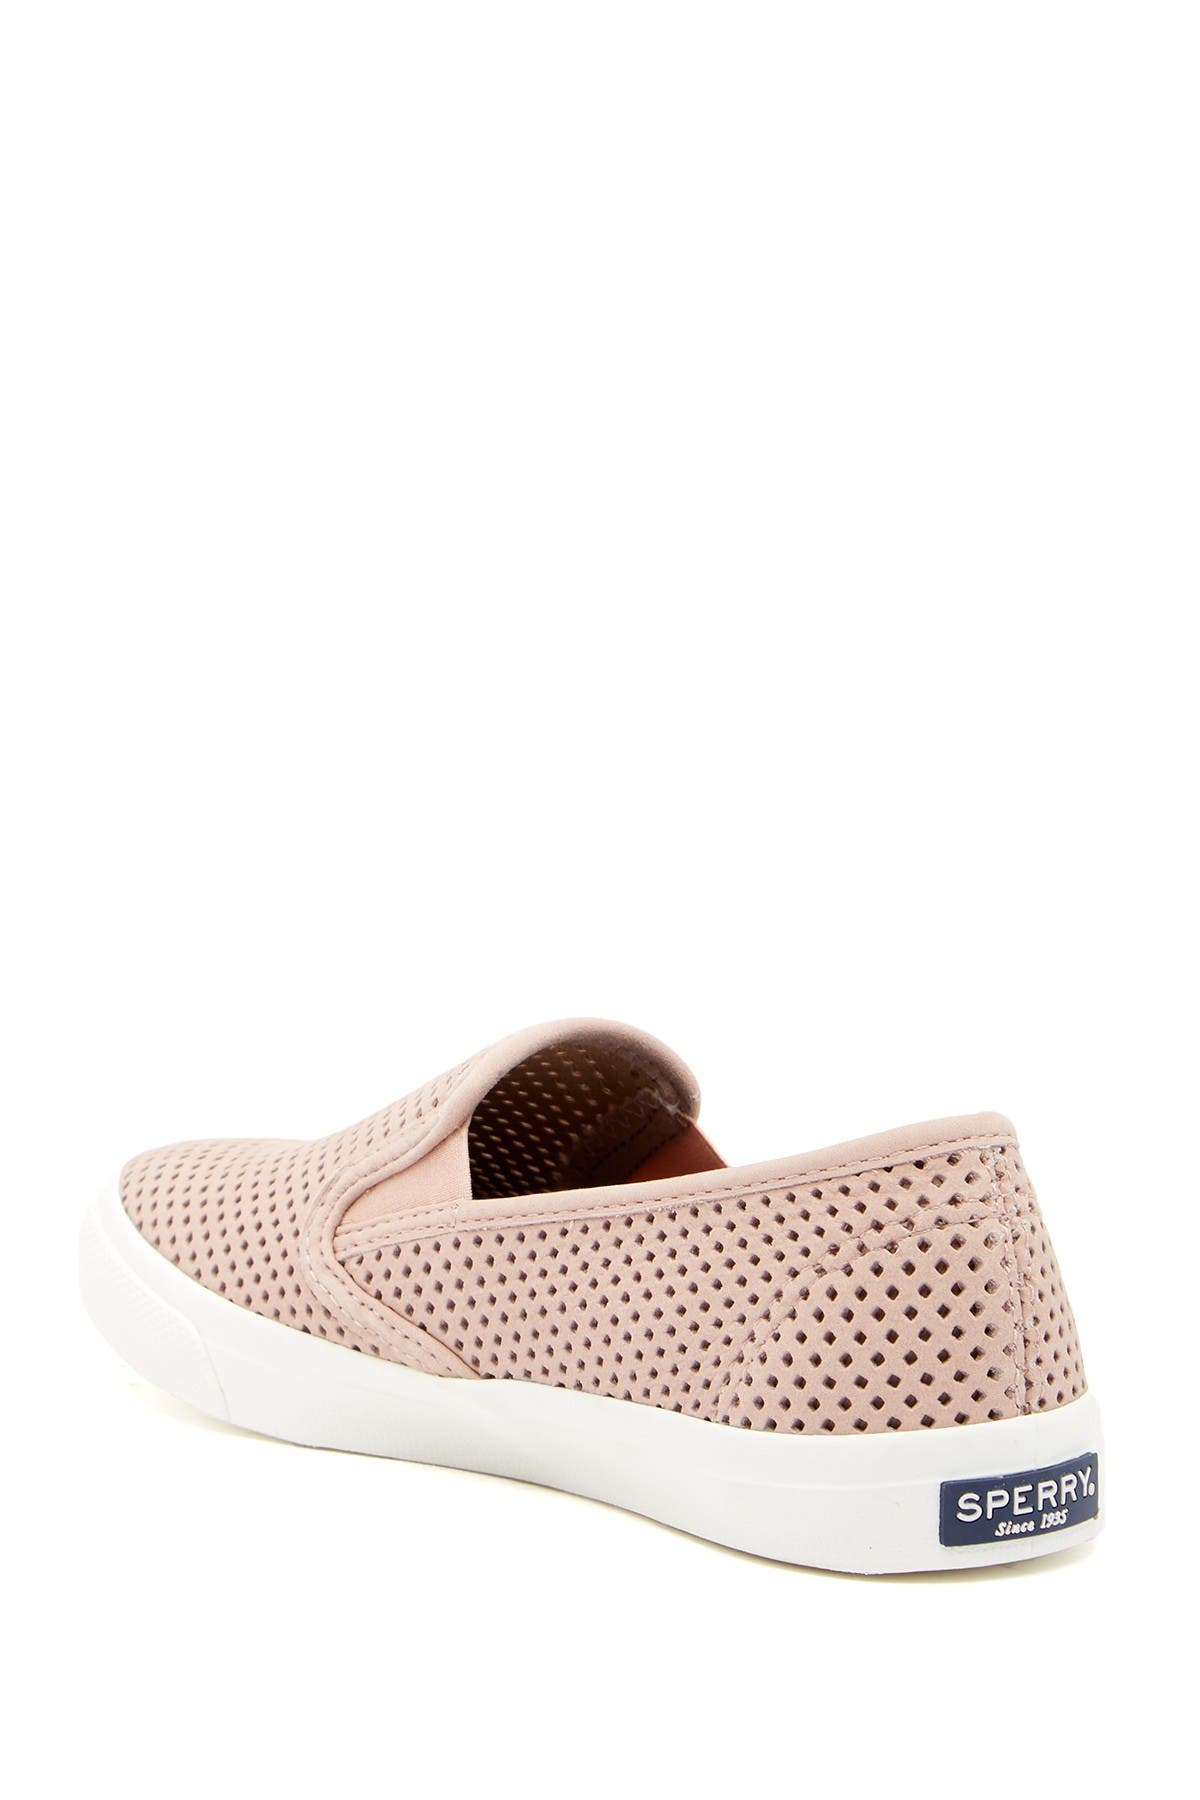 sperry perforated slip on